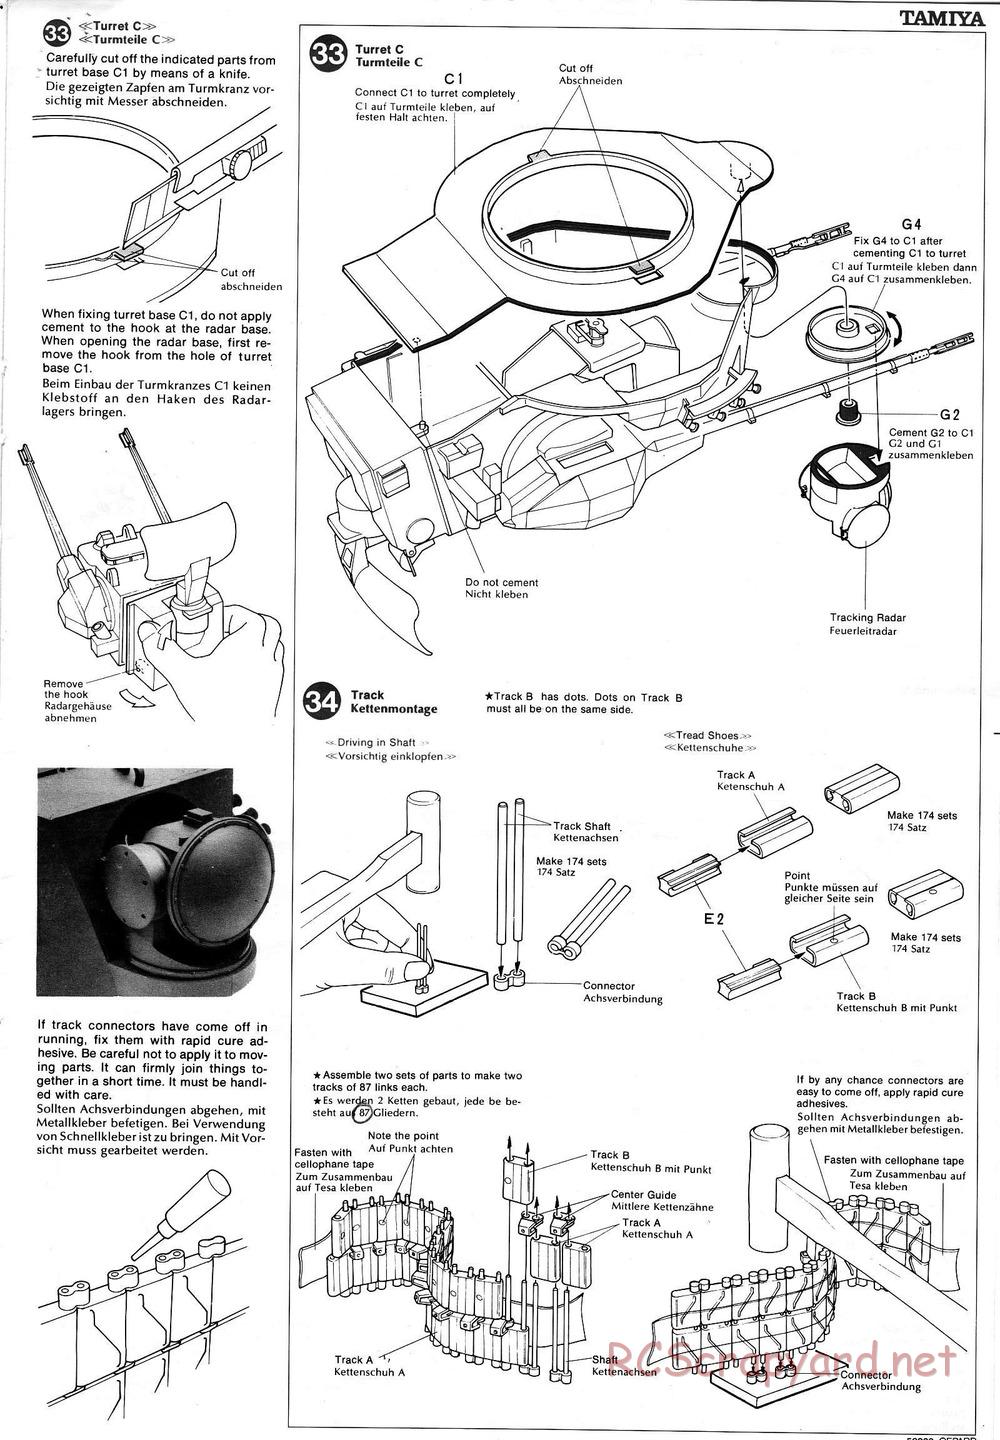 Tamiya - Flakpanzer Gepard - 1/16 Scale Chassis - Manual - Page 15